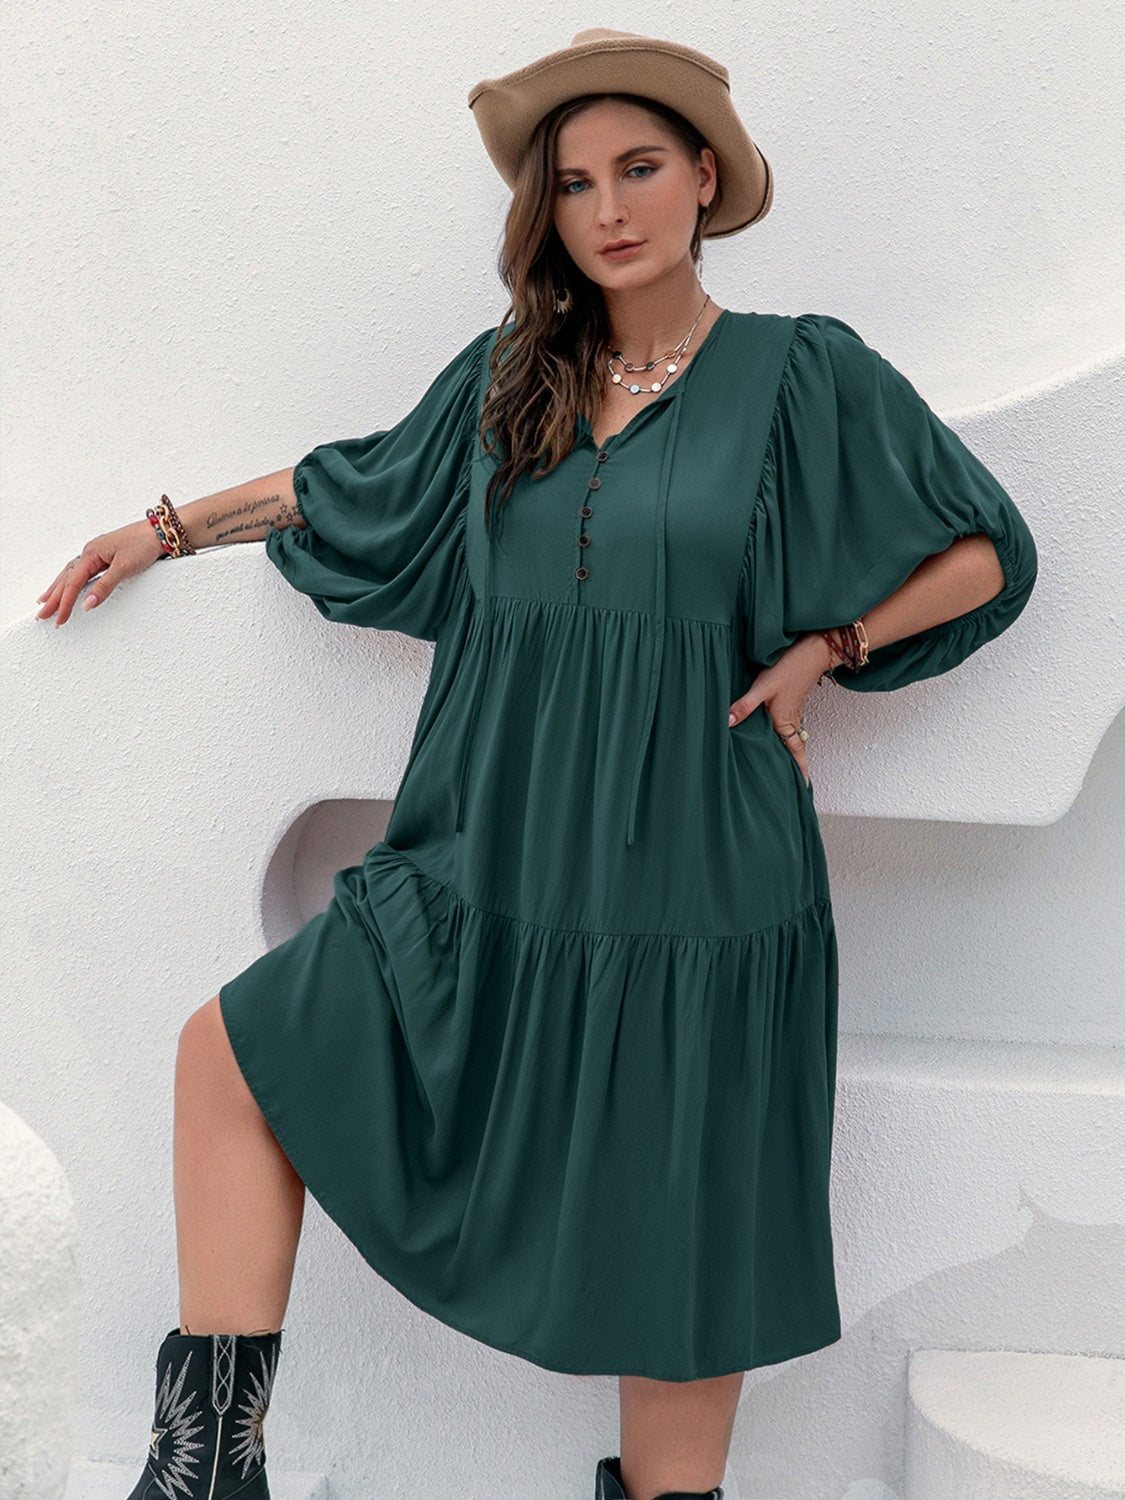 Elegant Plus Size Beach Wedding Guest Dress - Stylish Tie Neck Balloon Sleeve Midi Dress for Special Occasions